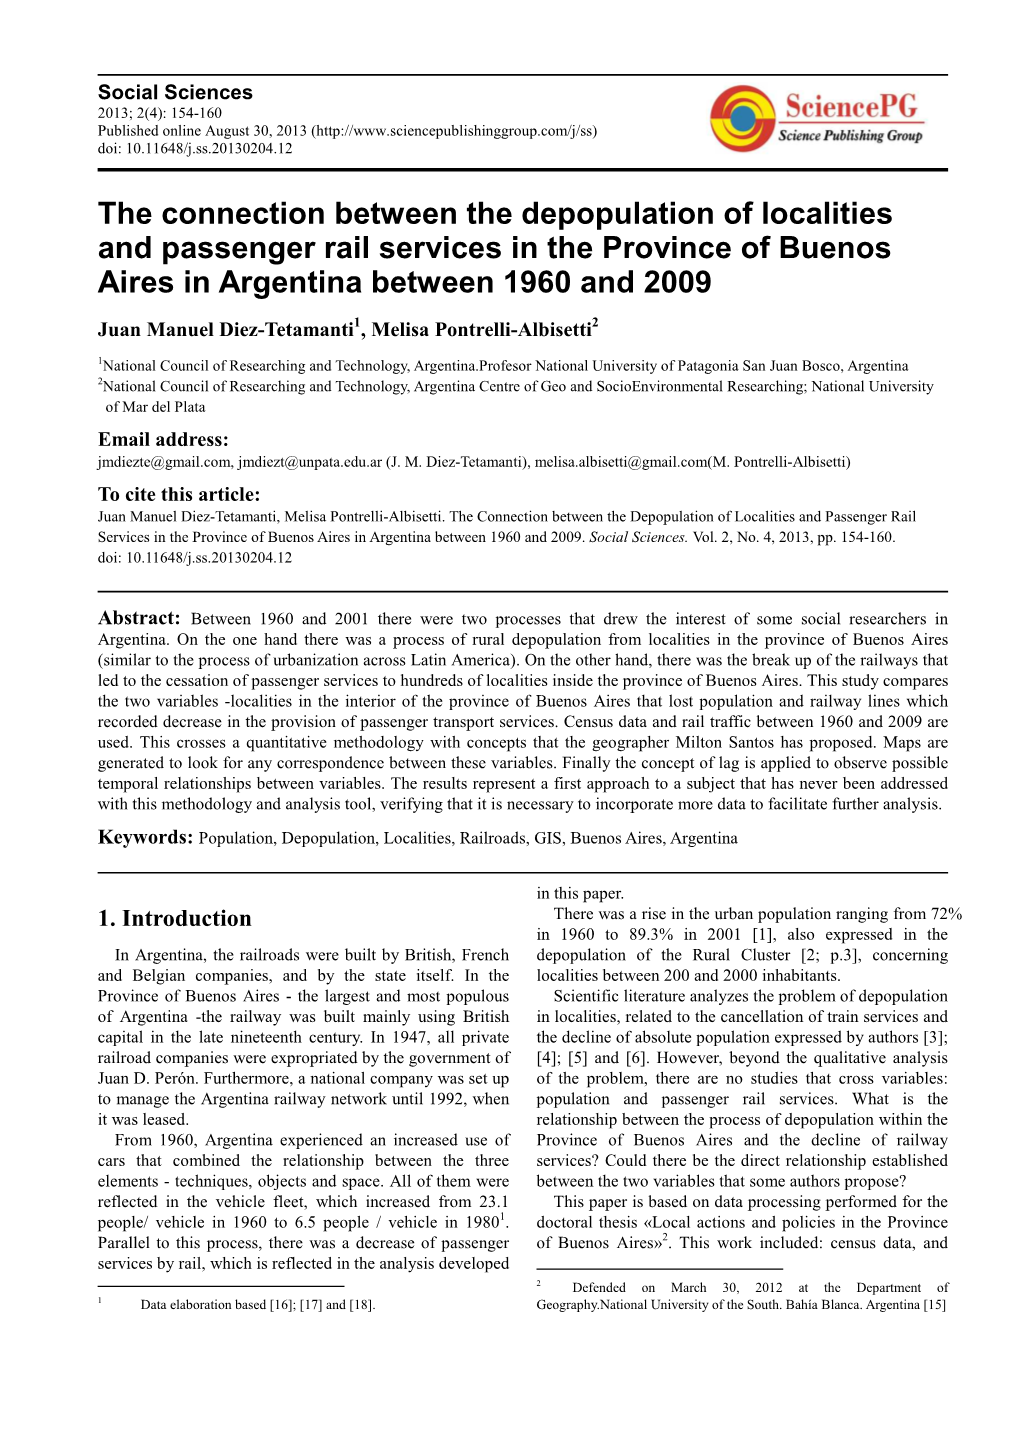 The Connection Between the Depopulation of Localities and Passenger Rail Services in the Province of Buenos Aires in Argentina Between 1960 and 2009